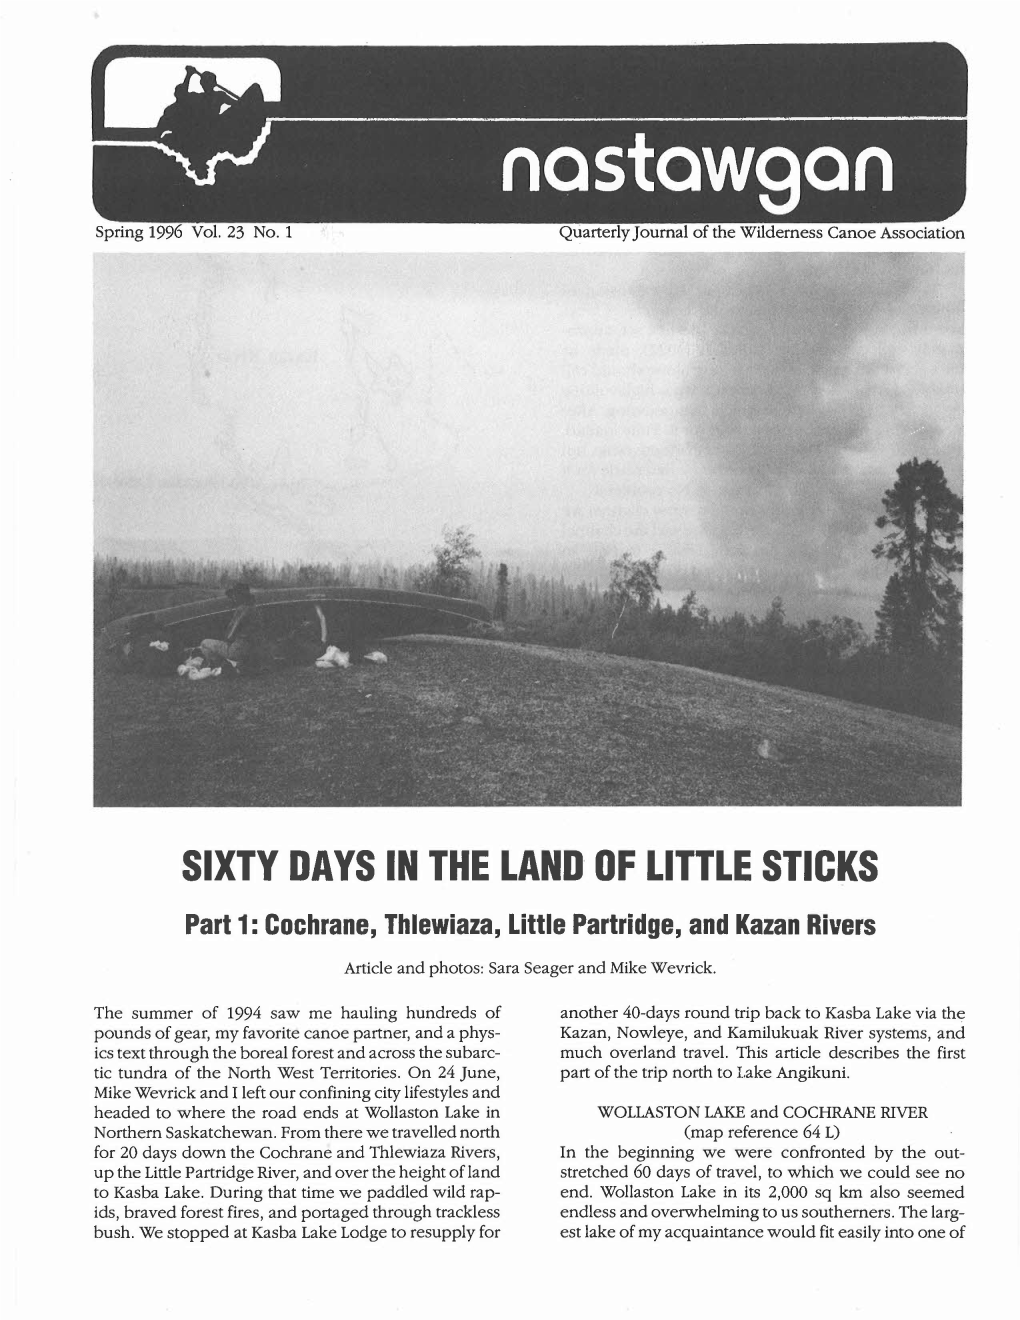 SIXTY DAYS in the LAND of LITTLE STICKS Part 1: Cochrane, Thlewiaza, Little Partridge, and Kazan Rivers